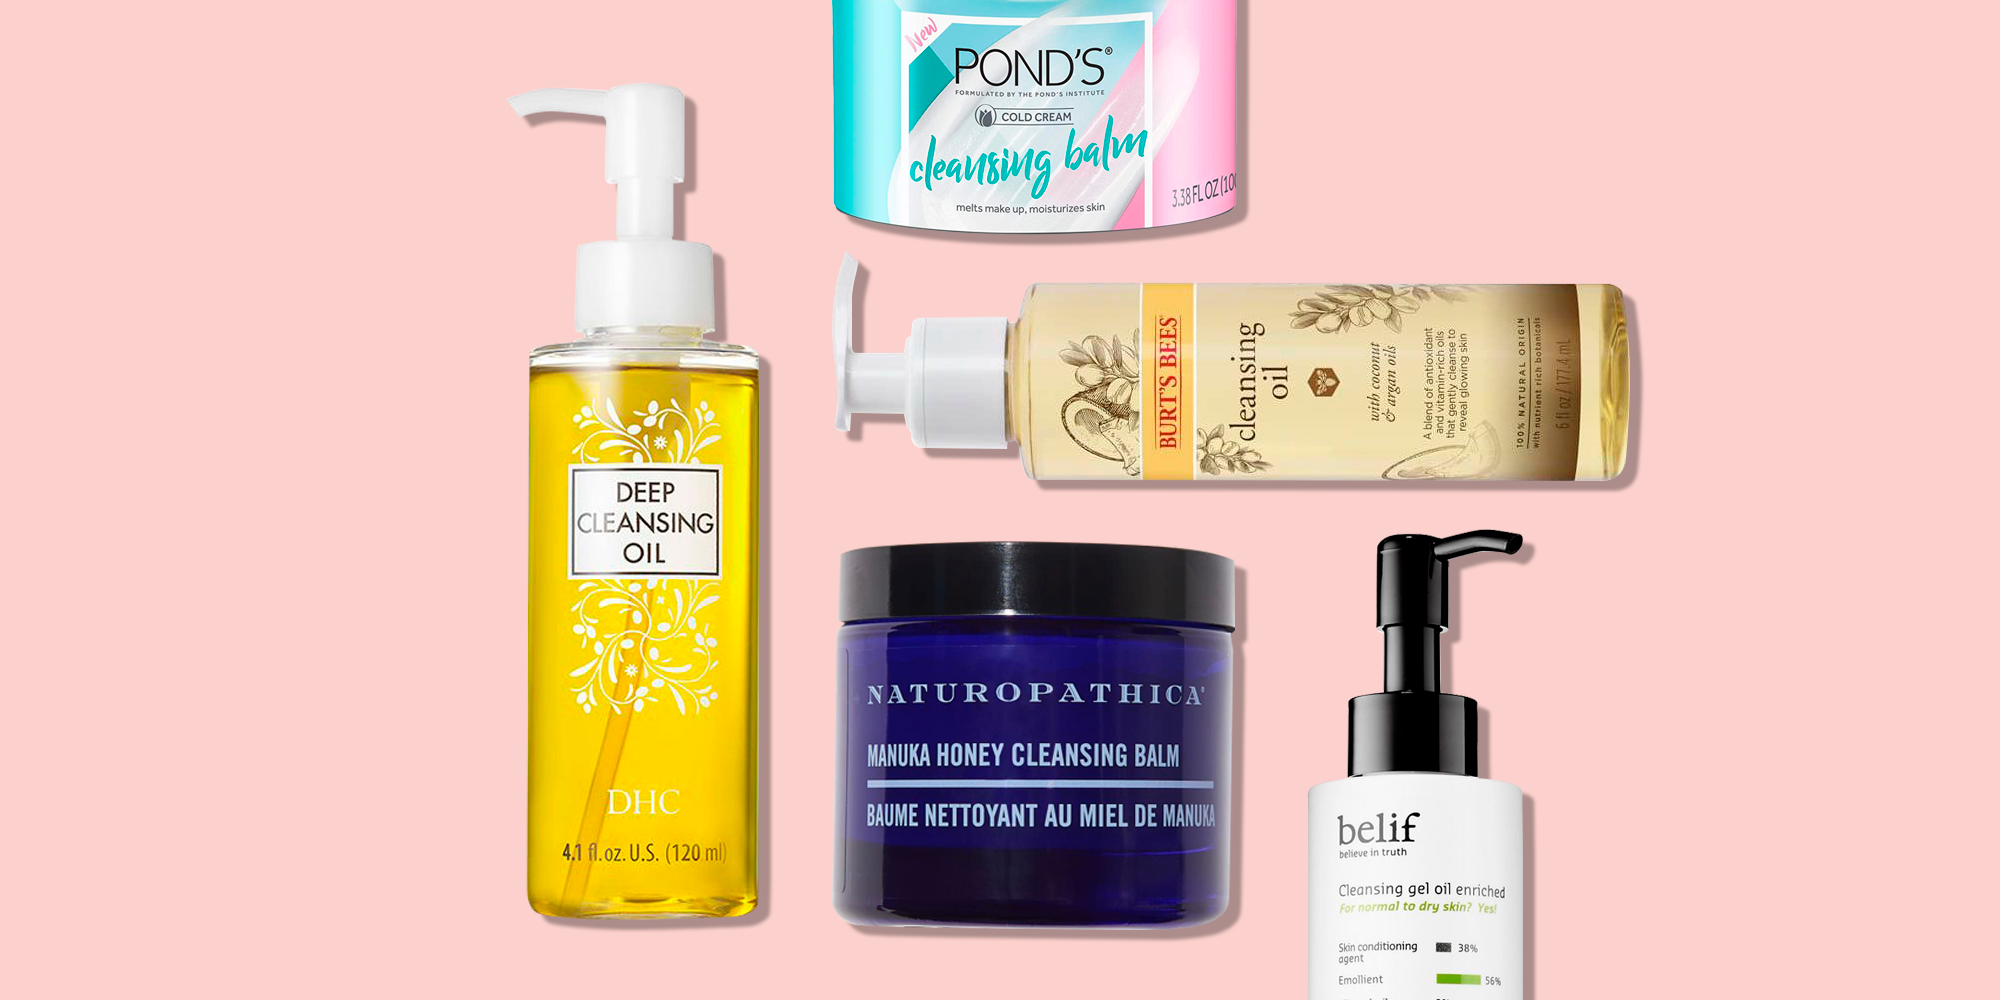 How to Get Glowing Skin: 19 Genius Tips You Haven't Tried